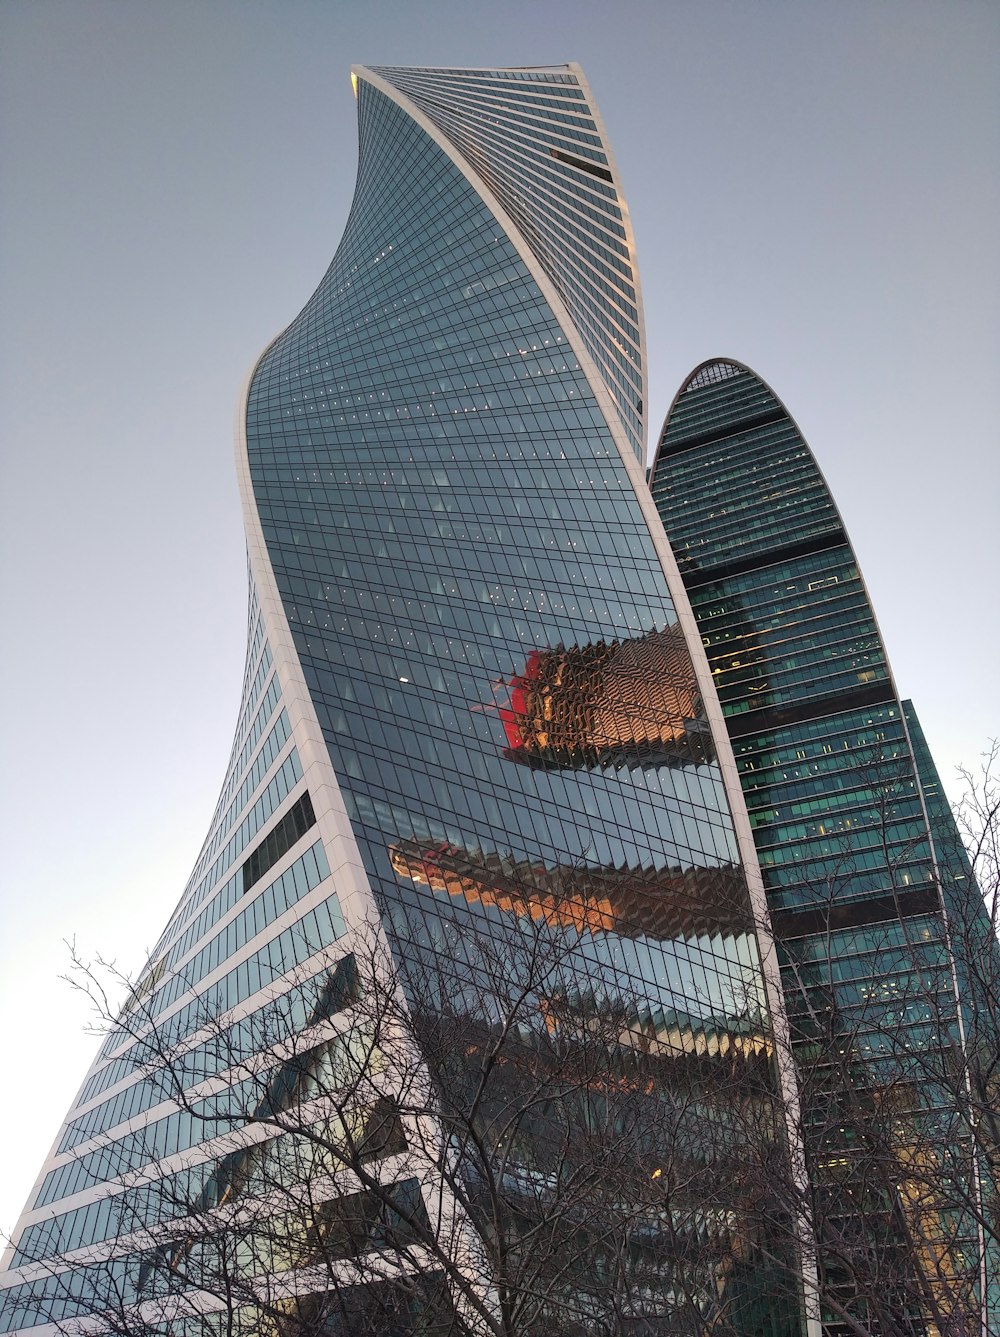 a very tall building with a very curved roof